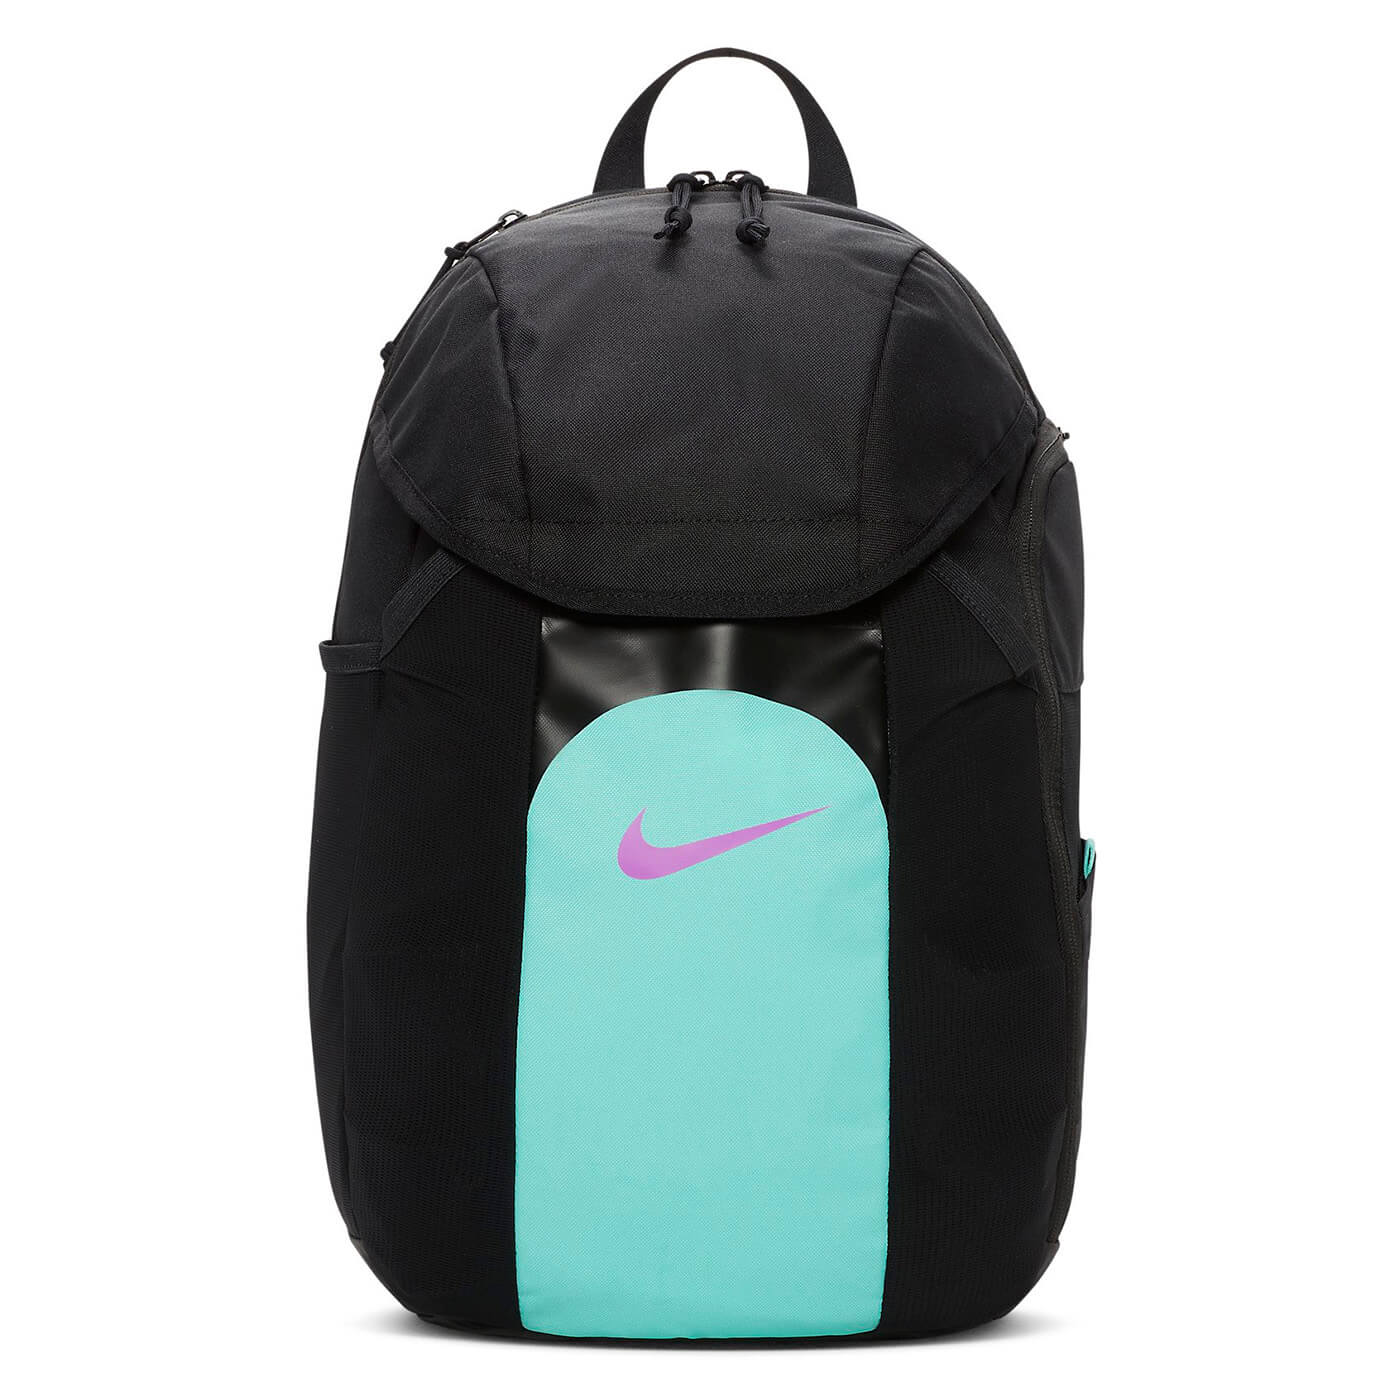 Academy Team Storm-FIT football backpack, with ball pocket, Turquoise